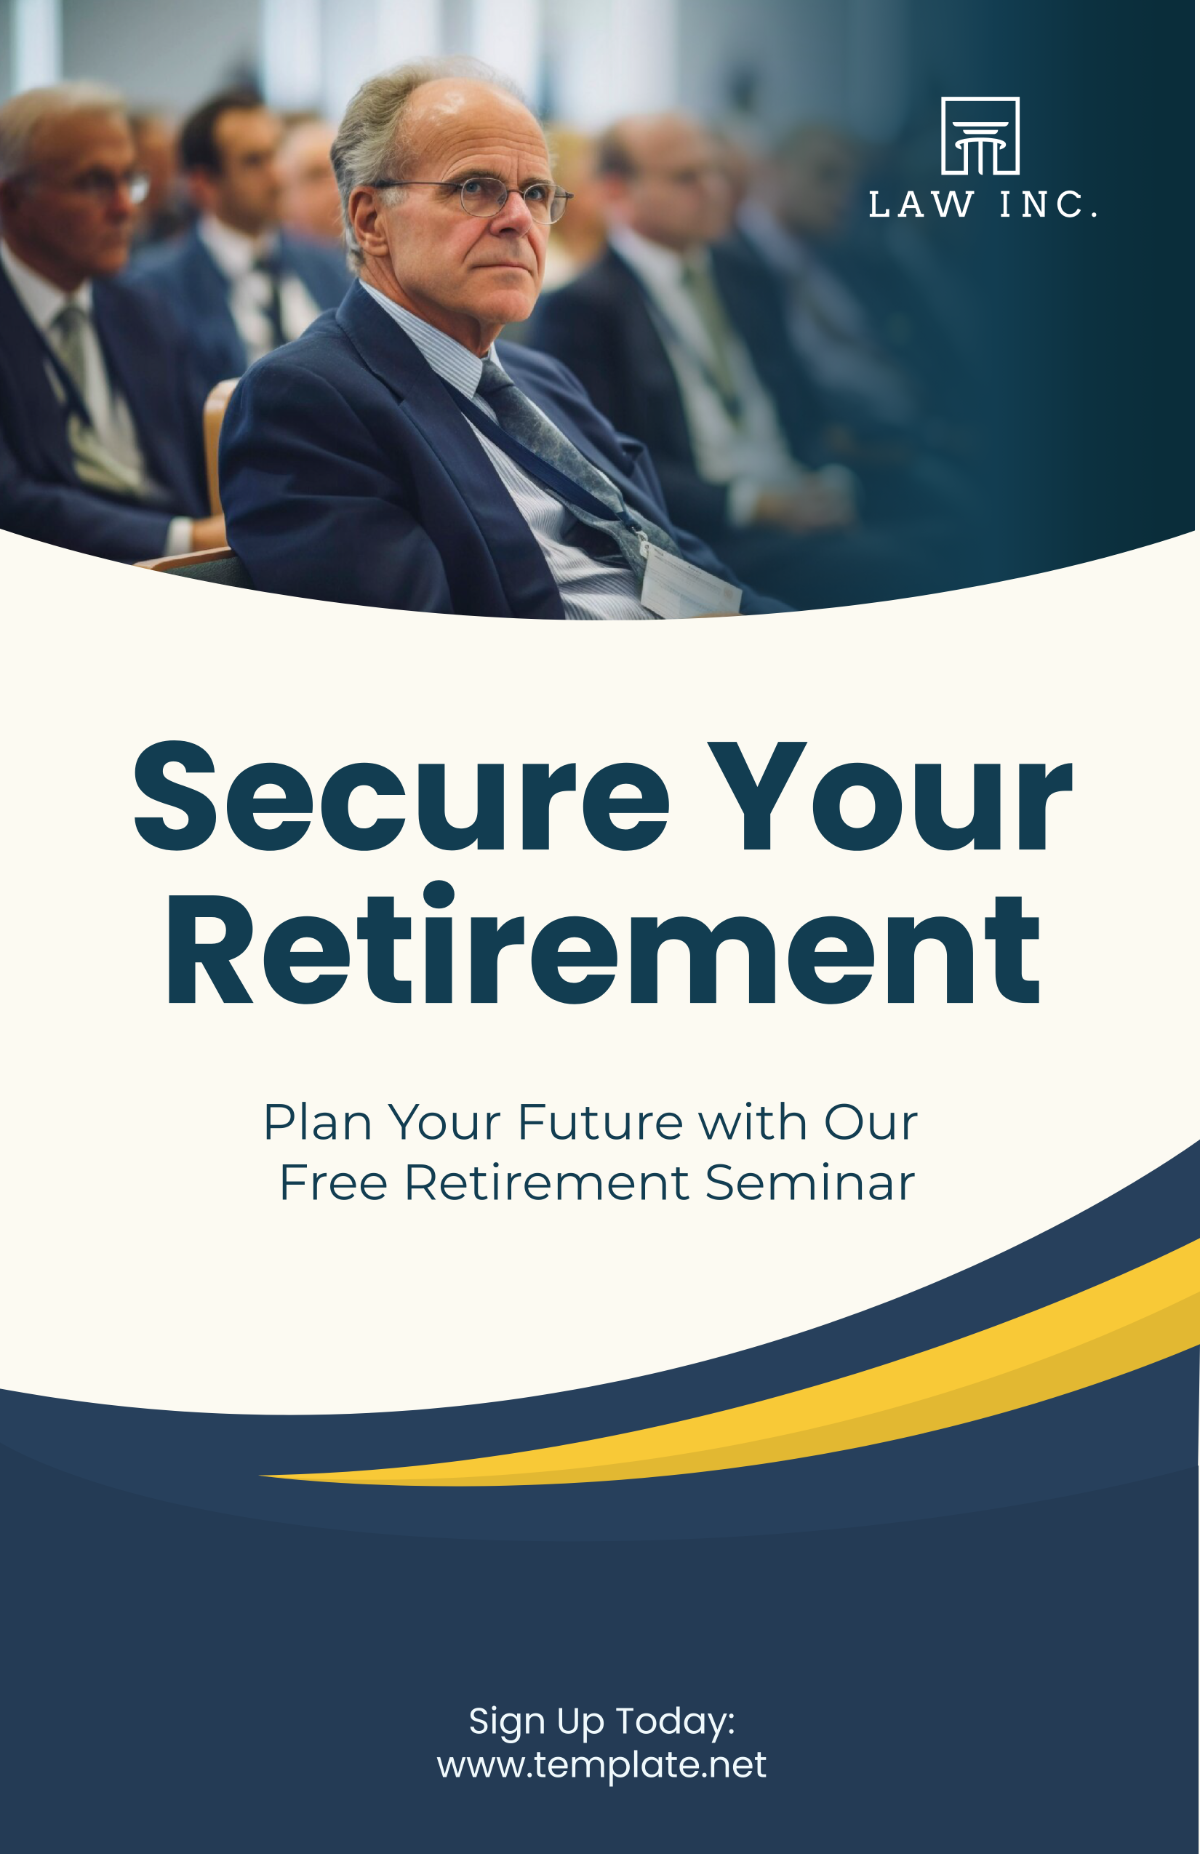 Law Firm Retirement Poster Template